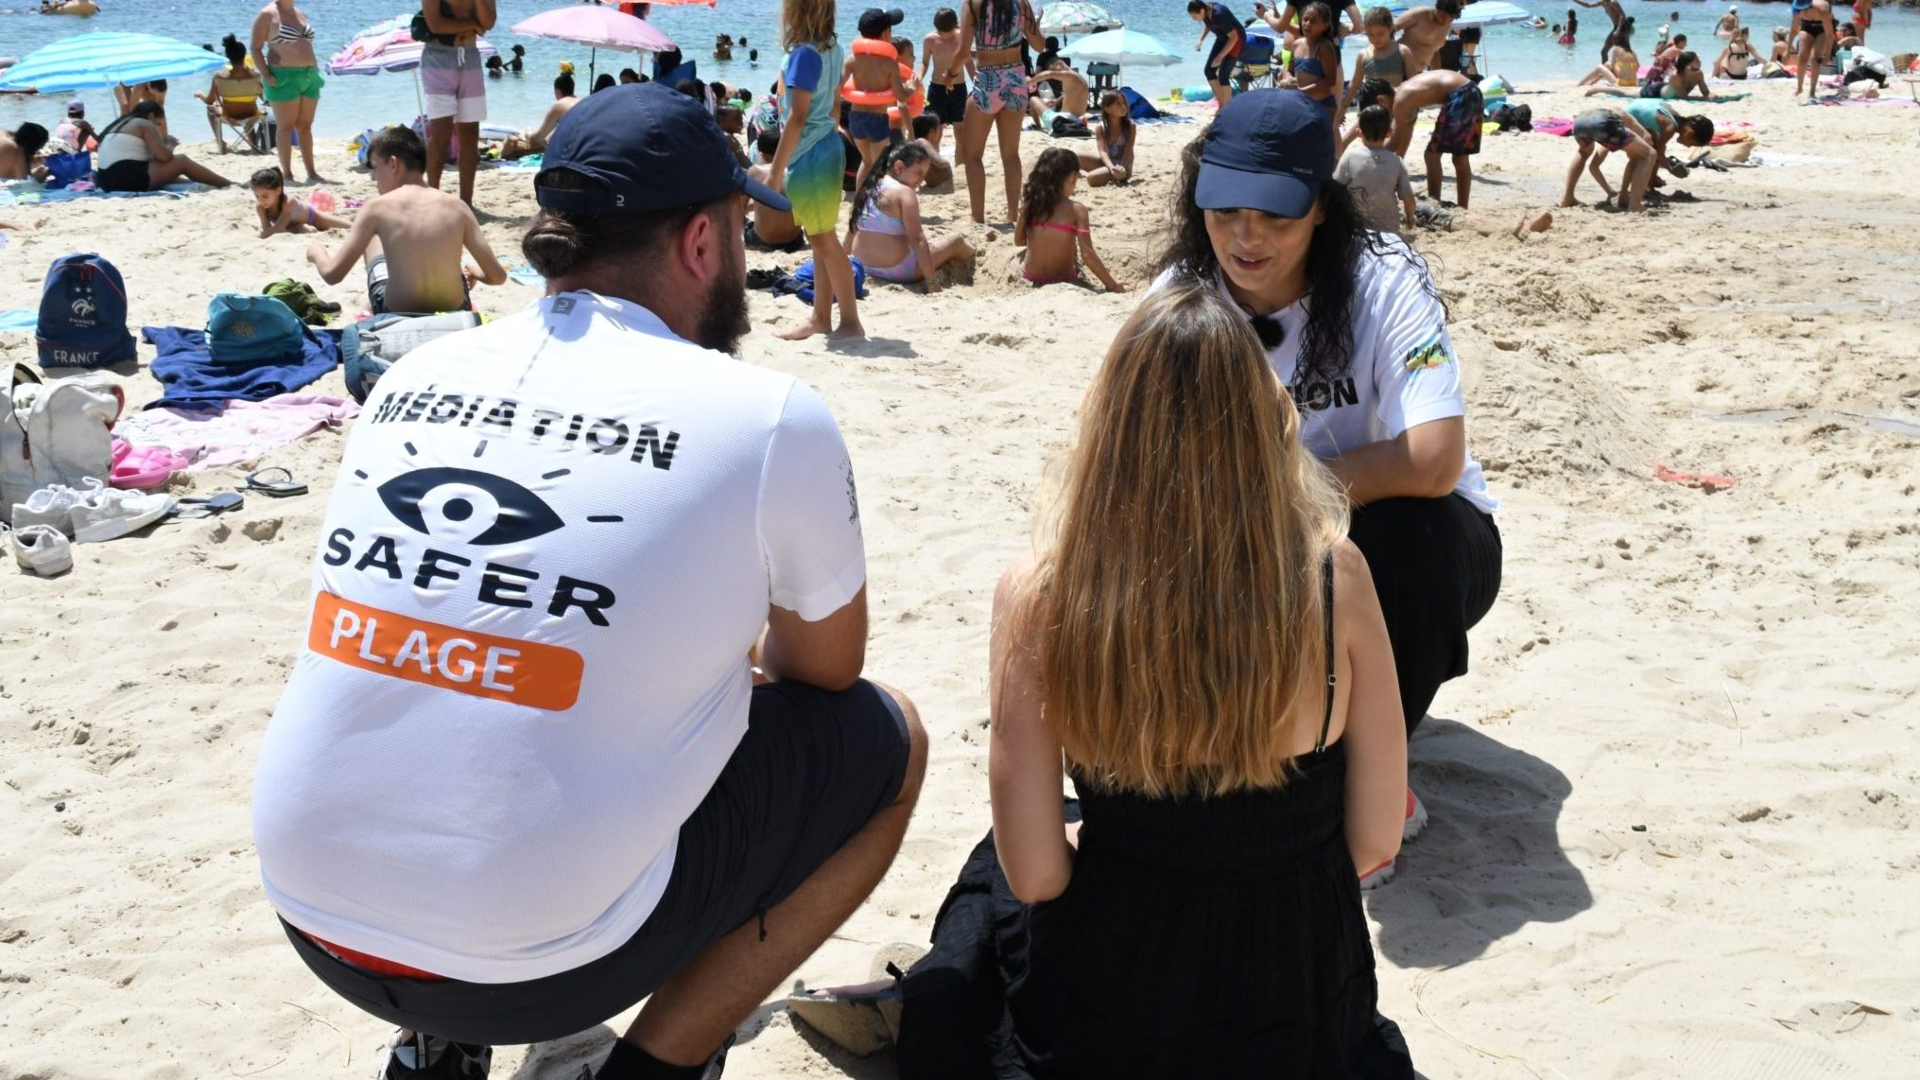 Safer Plage app protects women from sexual harassment on the beach